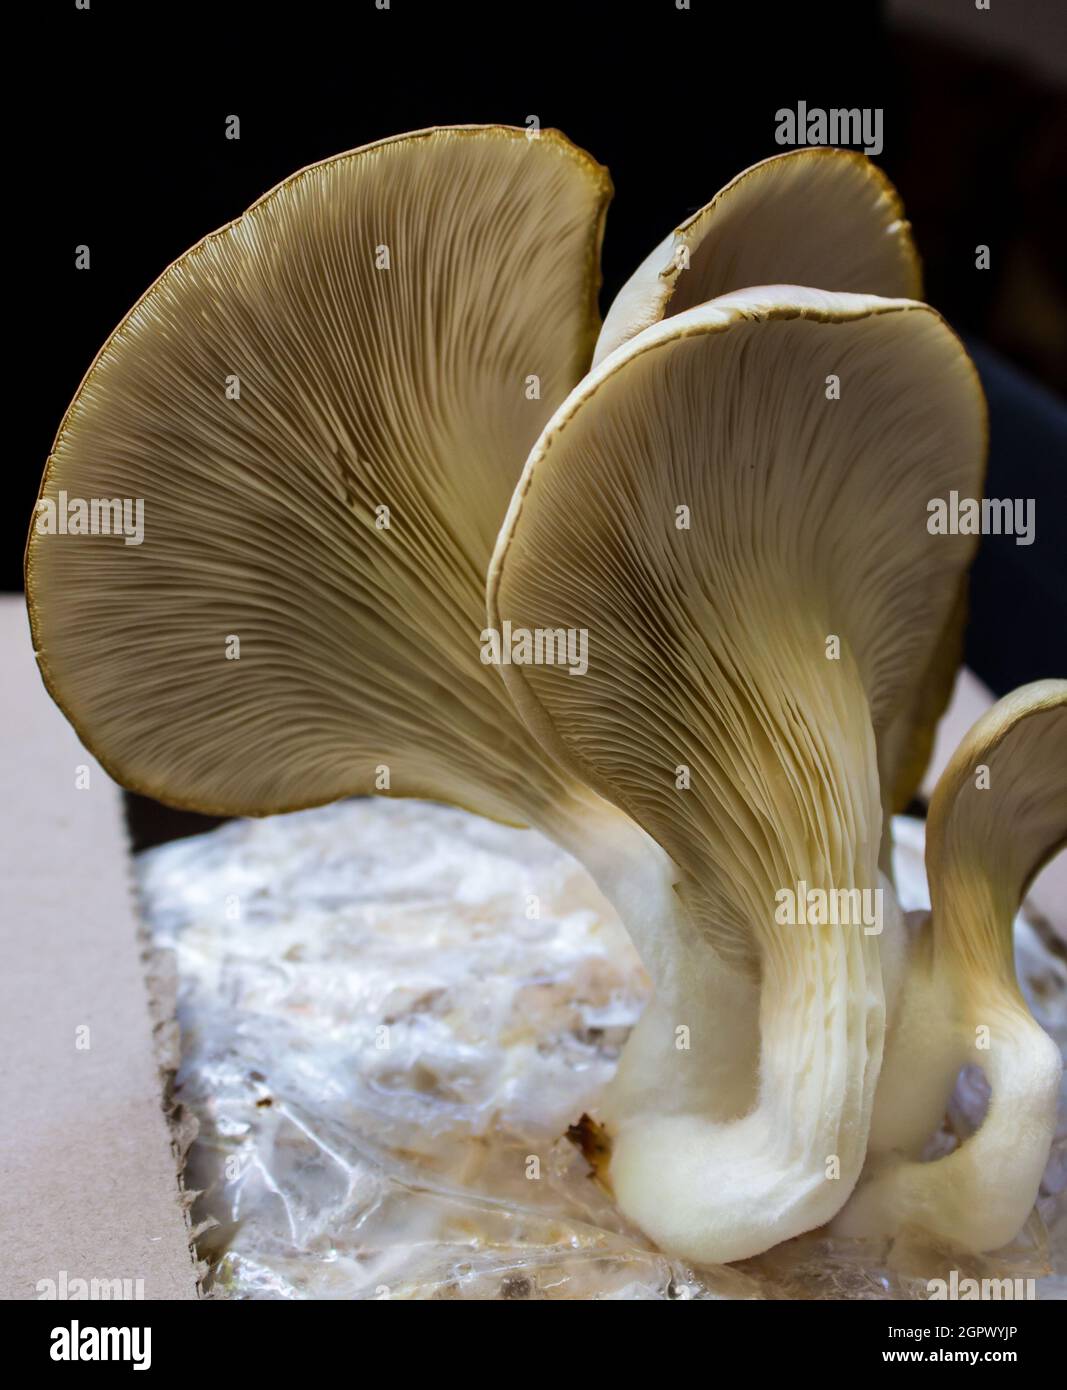 A grouping of large oyster mushrooms, Pleurotus Ostreatus, growing from a home growing kit Stock Photo